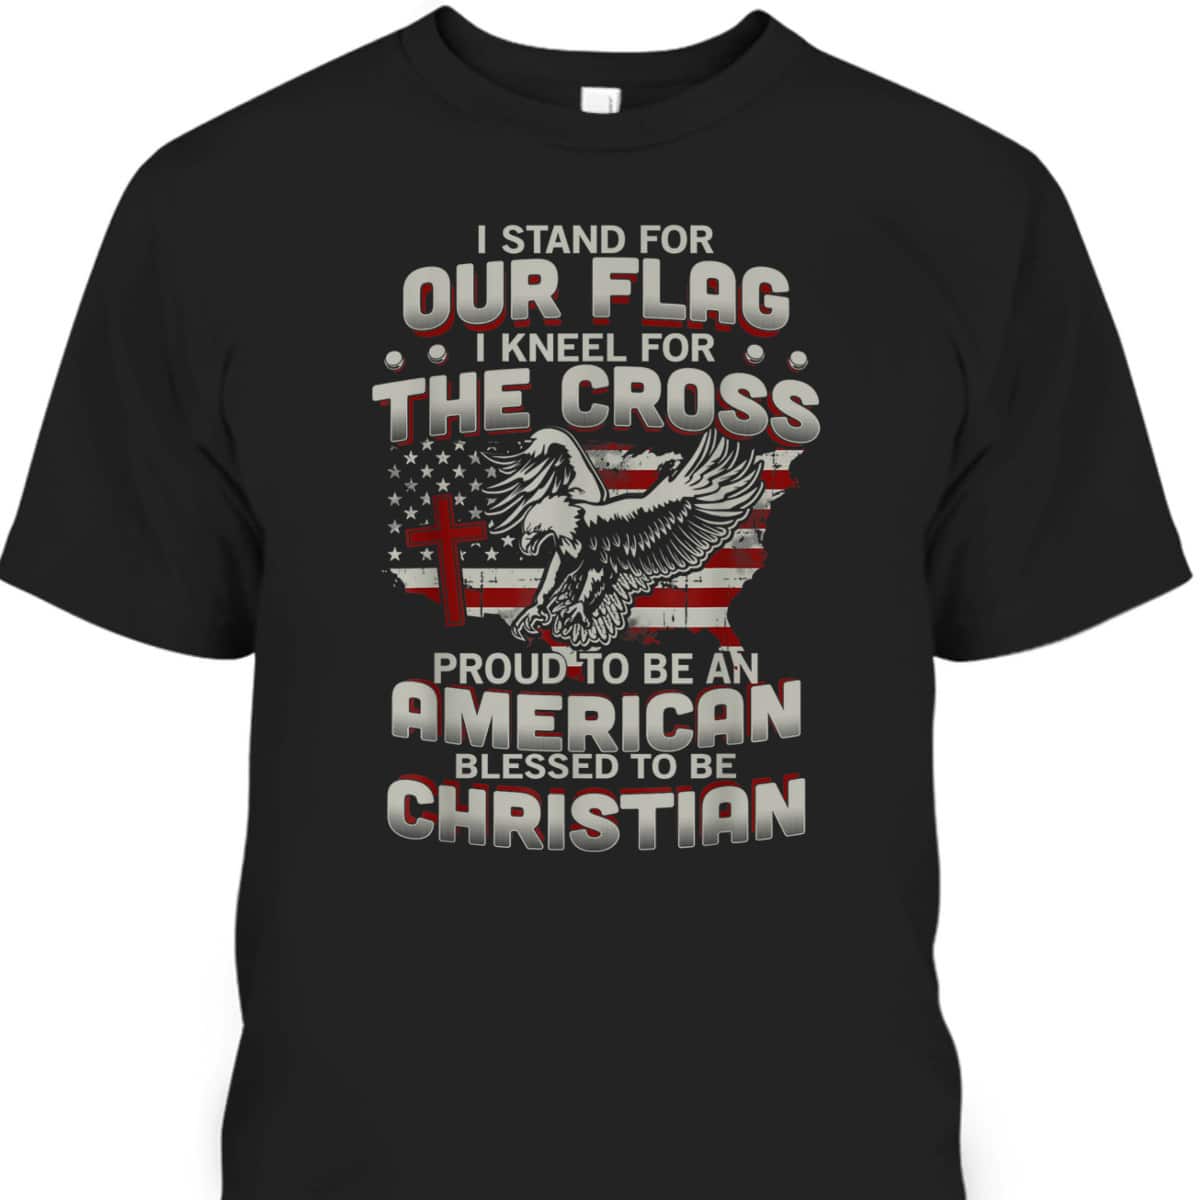 I Proudly Stand For The Flag And Kneel For The Cross Blessed To Be Christian T-Shirt